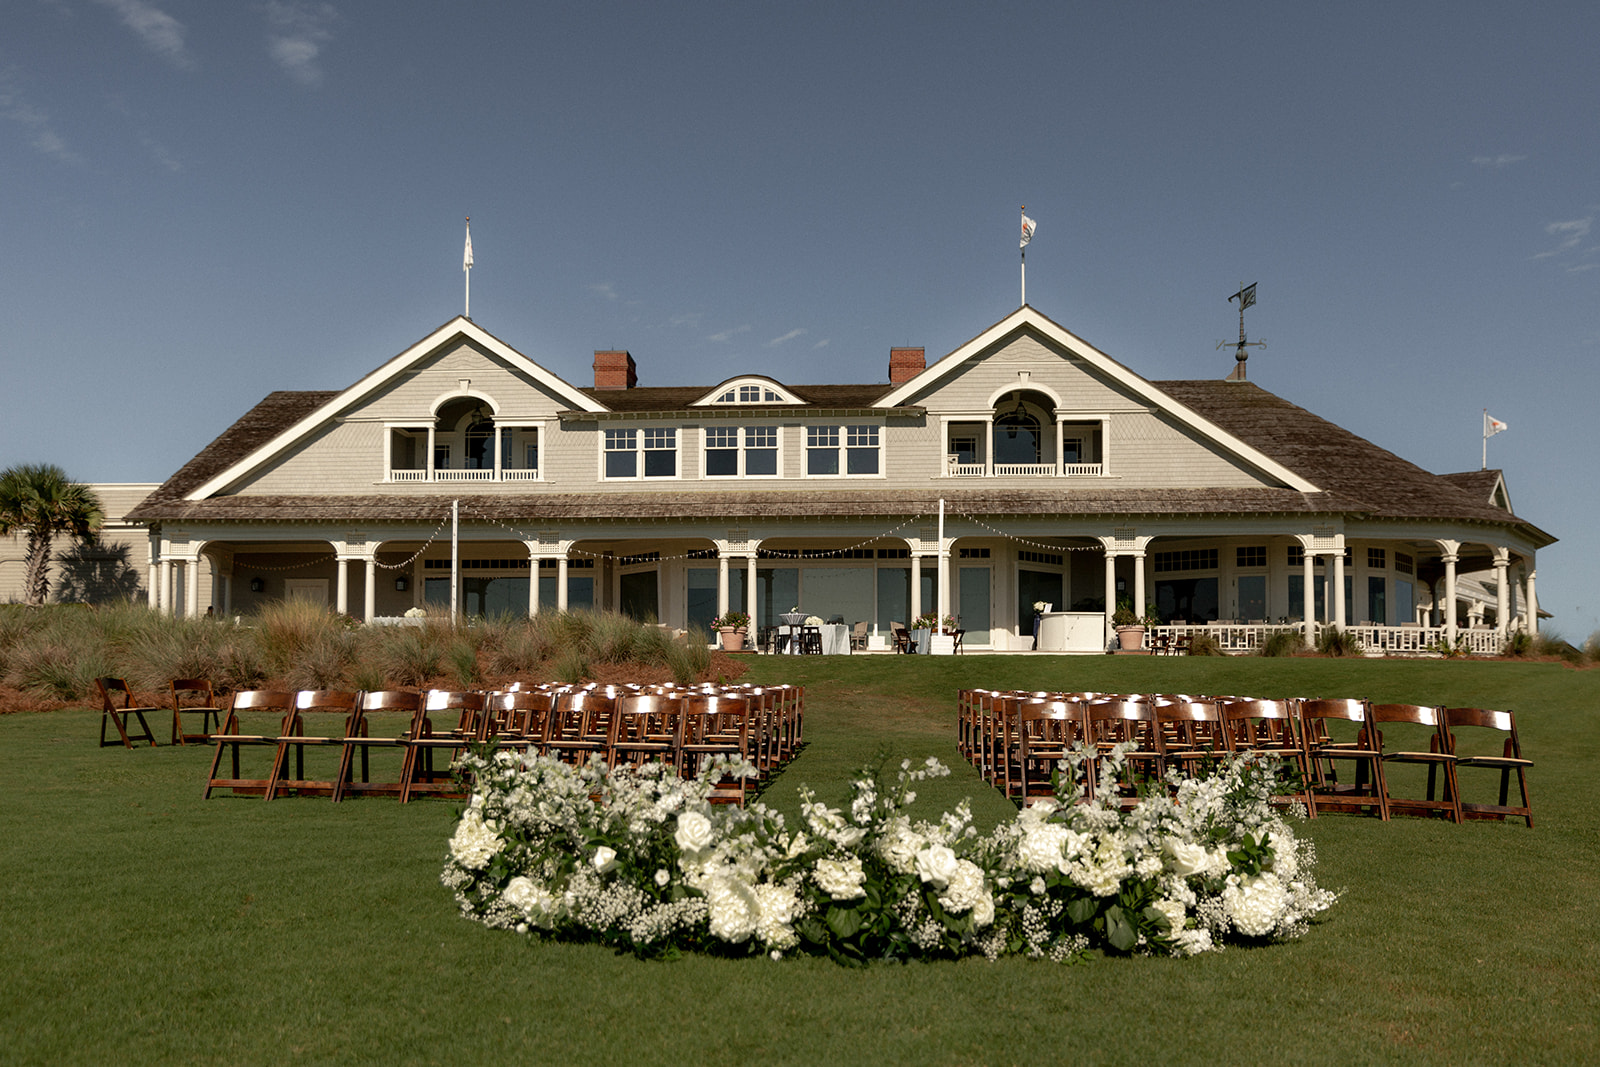 Kiawah Ocean Course wedding ceremony setup. Flowers and chairs with Kiawah club house in the background